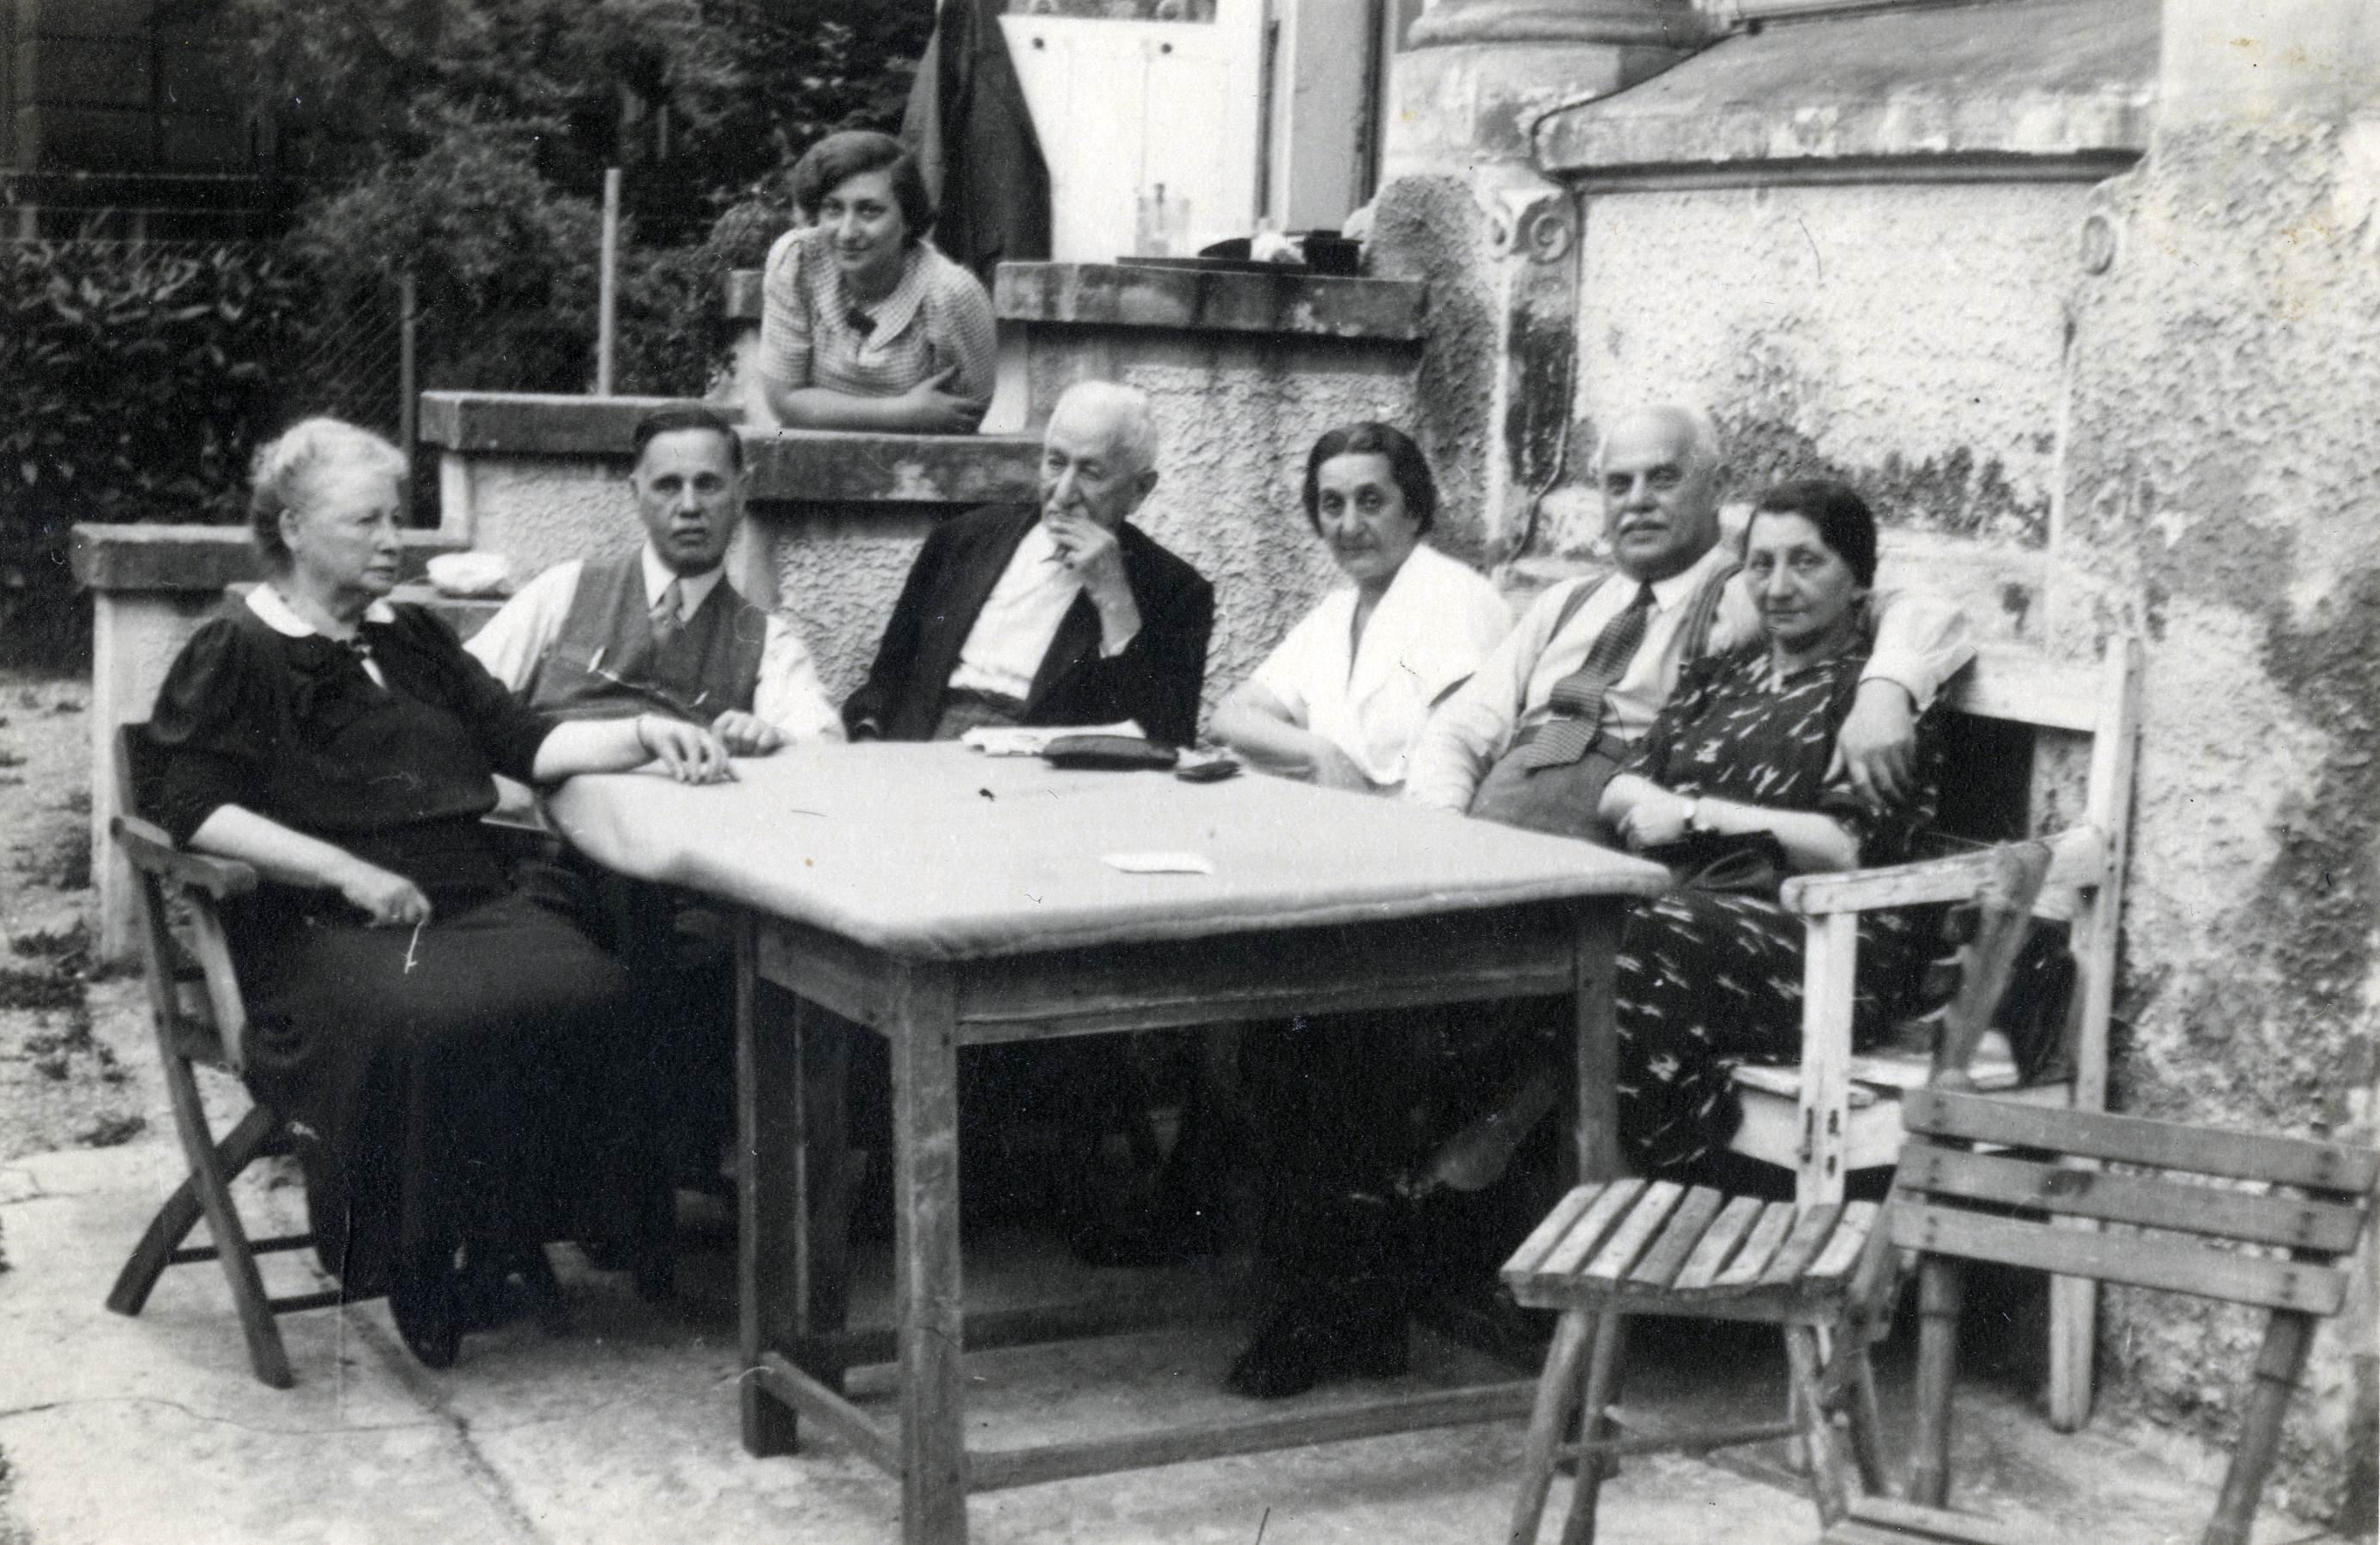 Friends and family gather around an outdoor table, on a terrace in Vienna.

Among those pictured are Philip and Sidonie Suss (far right).